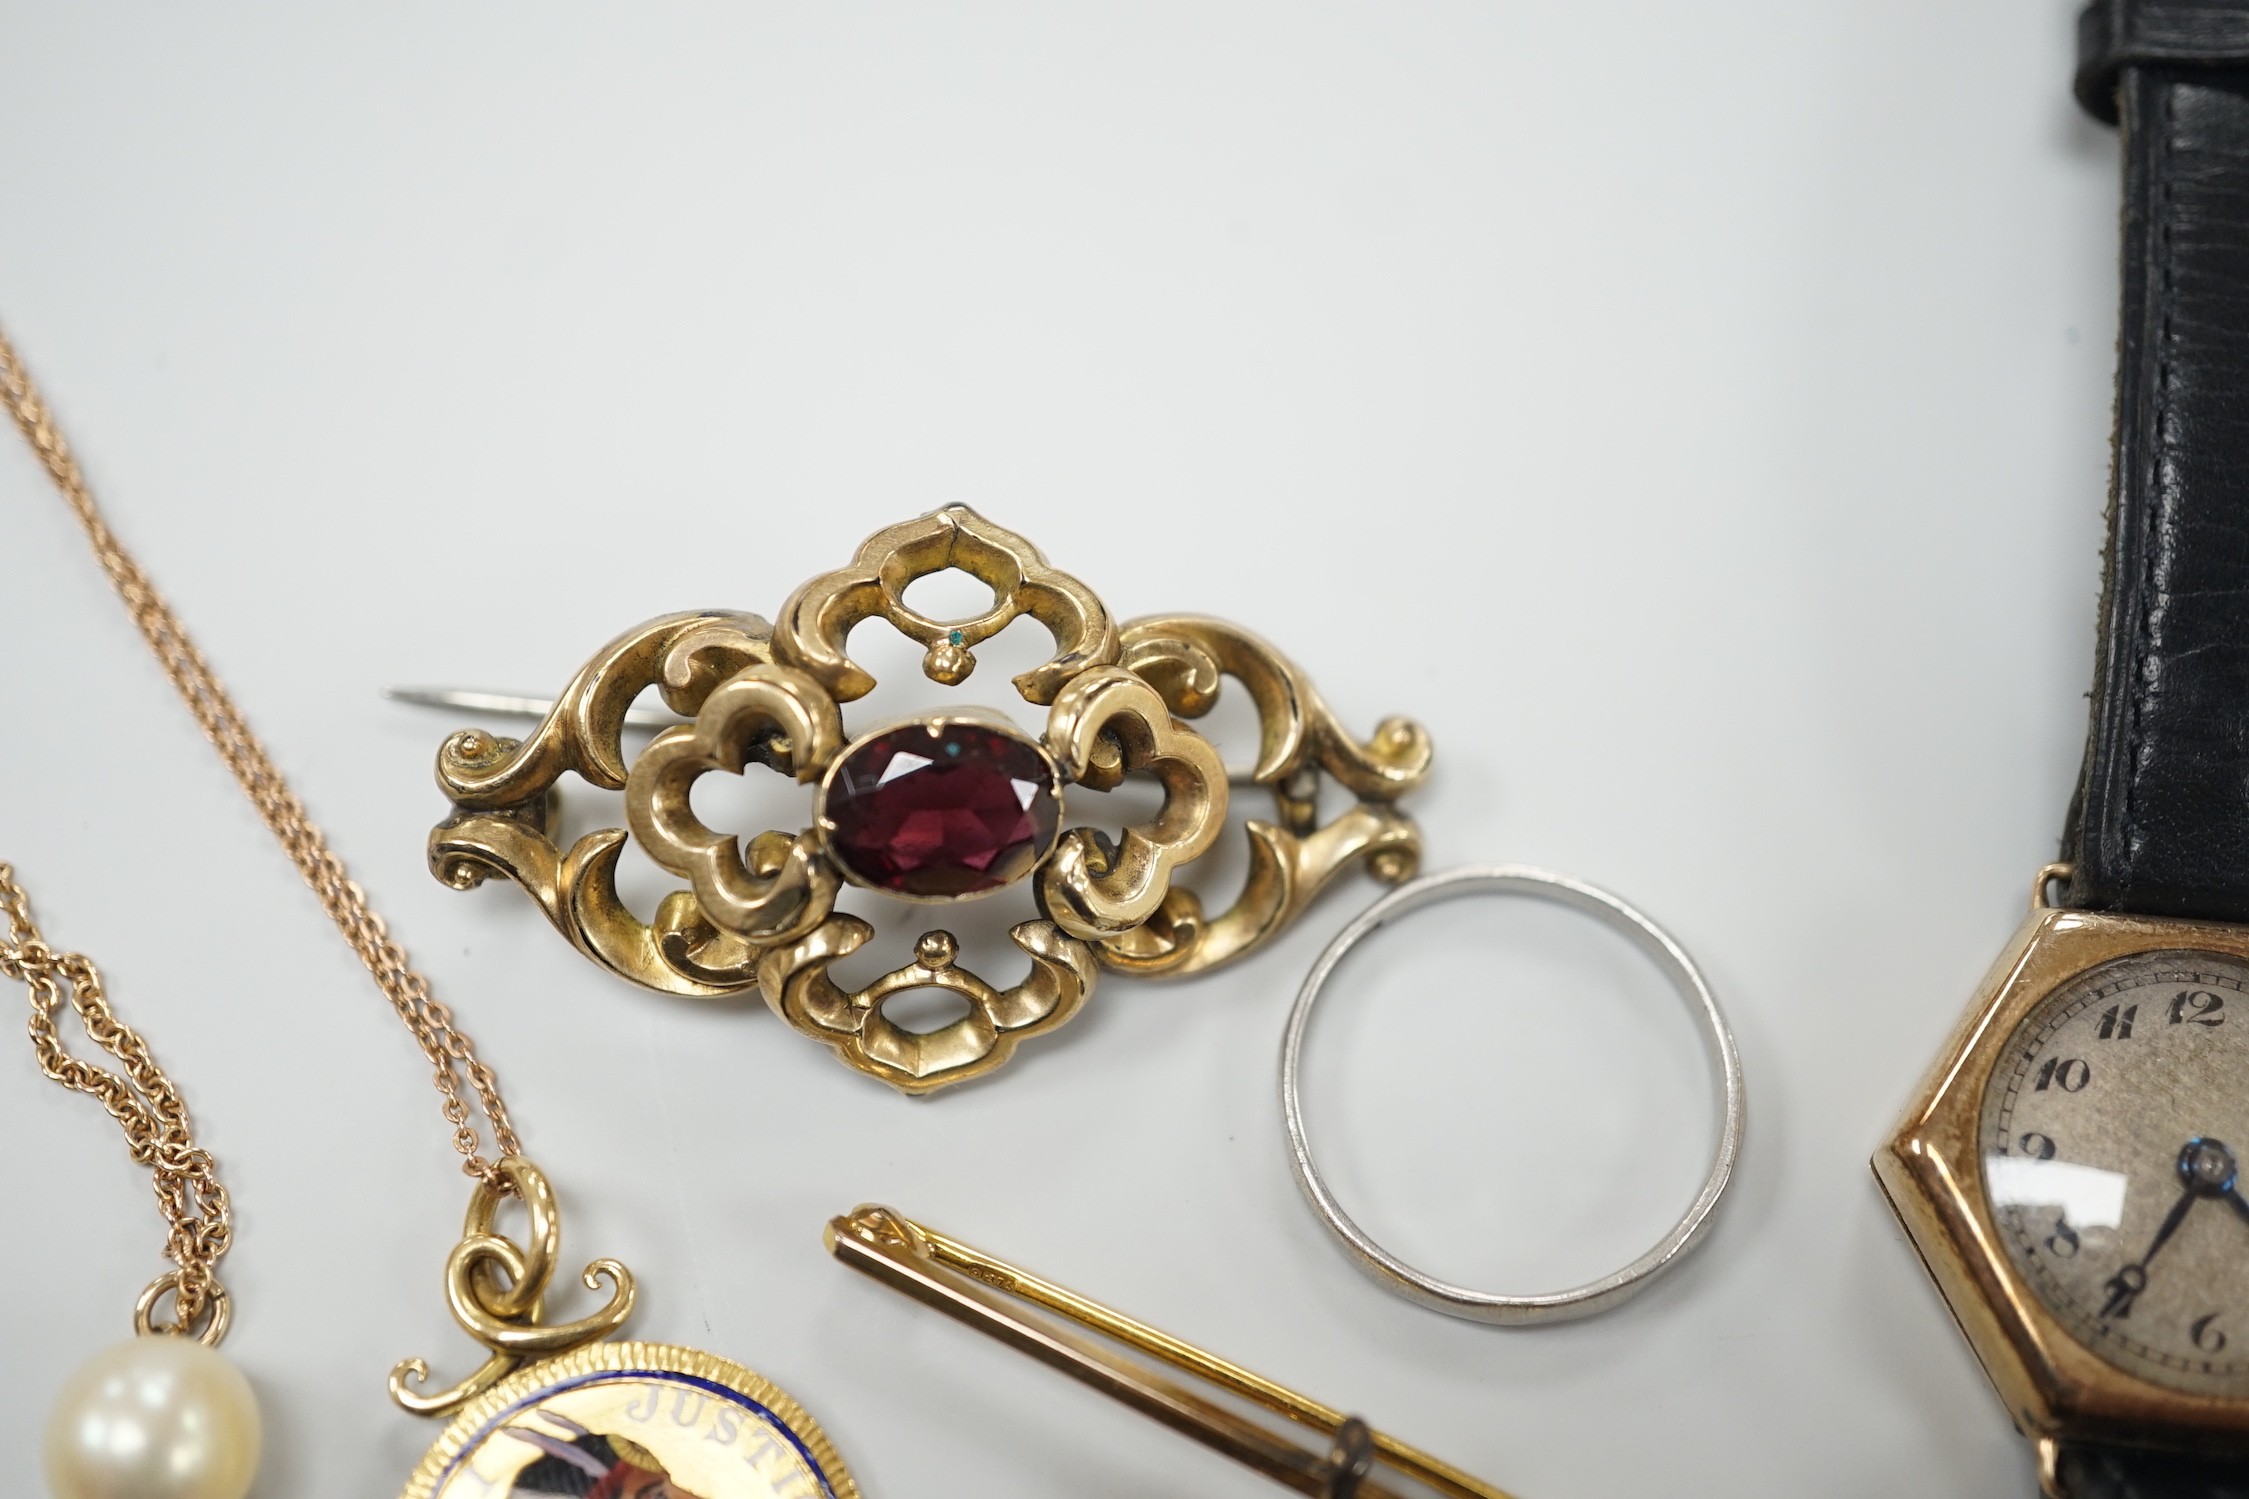 A platinum wedding band, 2.3 grams, a 9ct gold, garnet and seed pearl set bar brooch, a bird charm, a yellow metal and enamelled pendant on a 9ct chain, a 9ct and cultured pearl pendant necklace, a lady's 9ct gold hexago